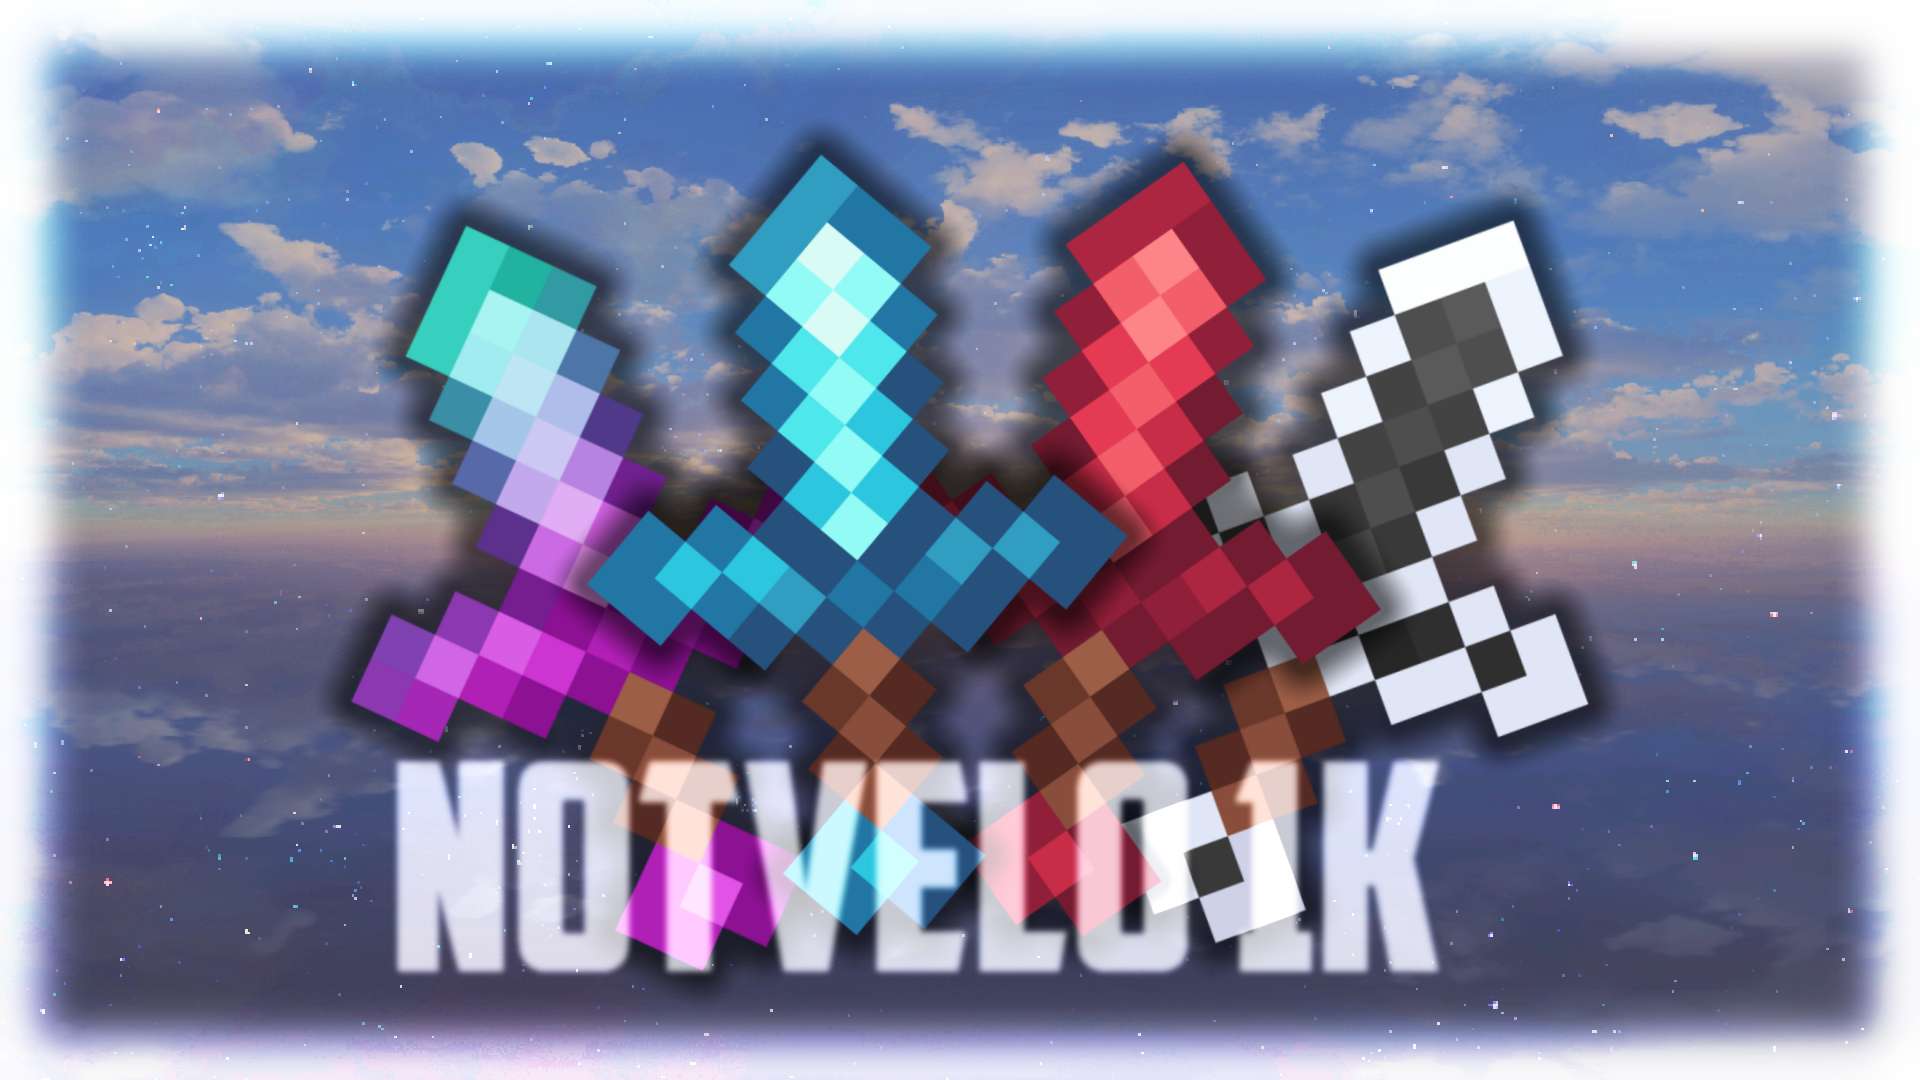 NotVelo 1k - Default 16x by Zlax on PvPRP